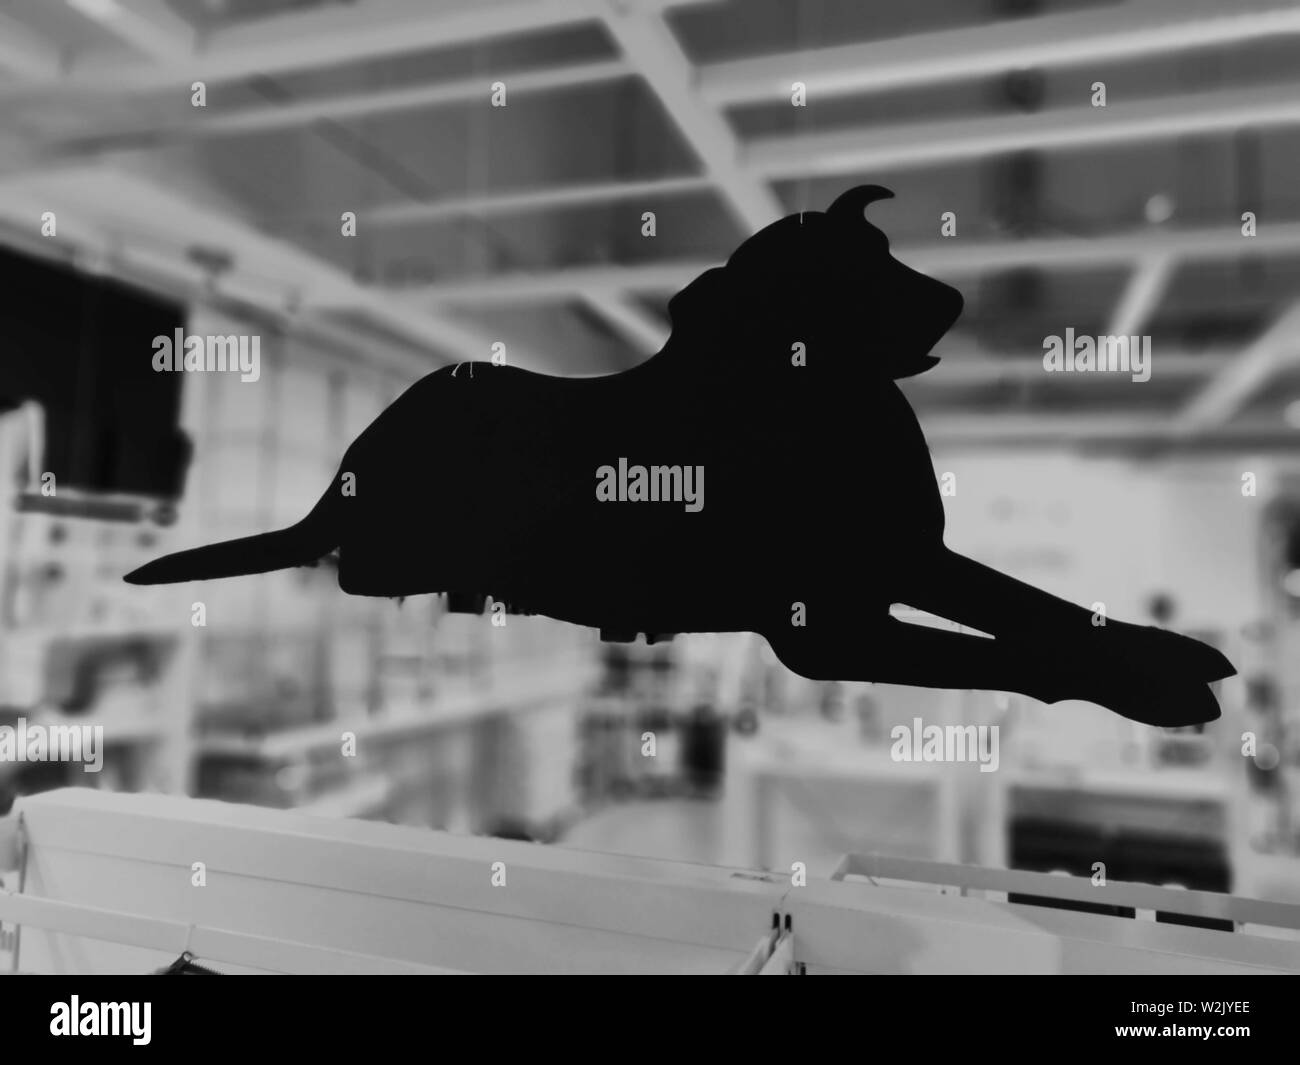 Black and white cardboard dog silhouette with blurred background Stock Photo